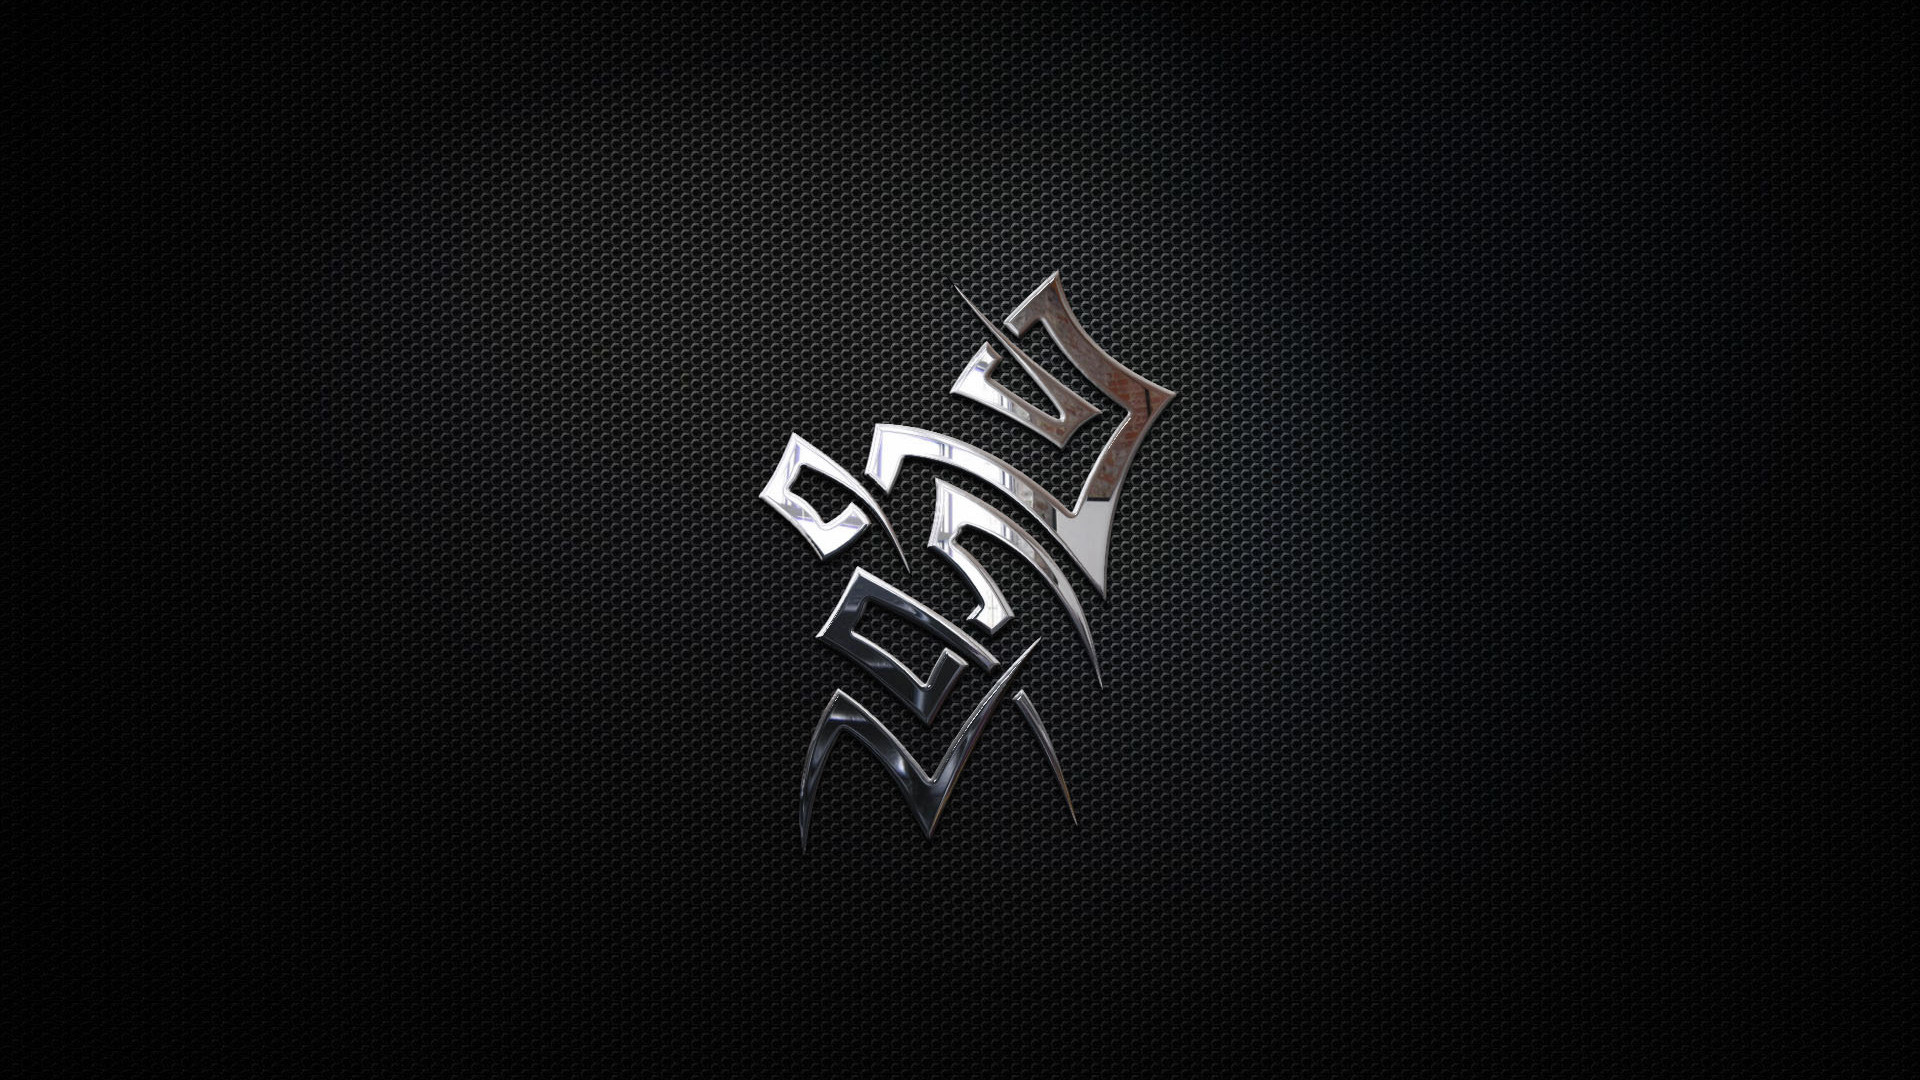 1920x1080 Tribal Wallpapers Archives - Page 2 of 3 - Wallpaper